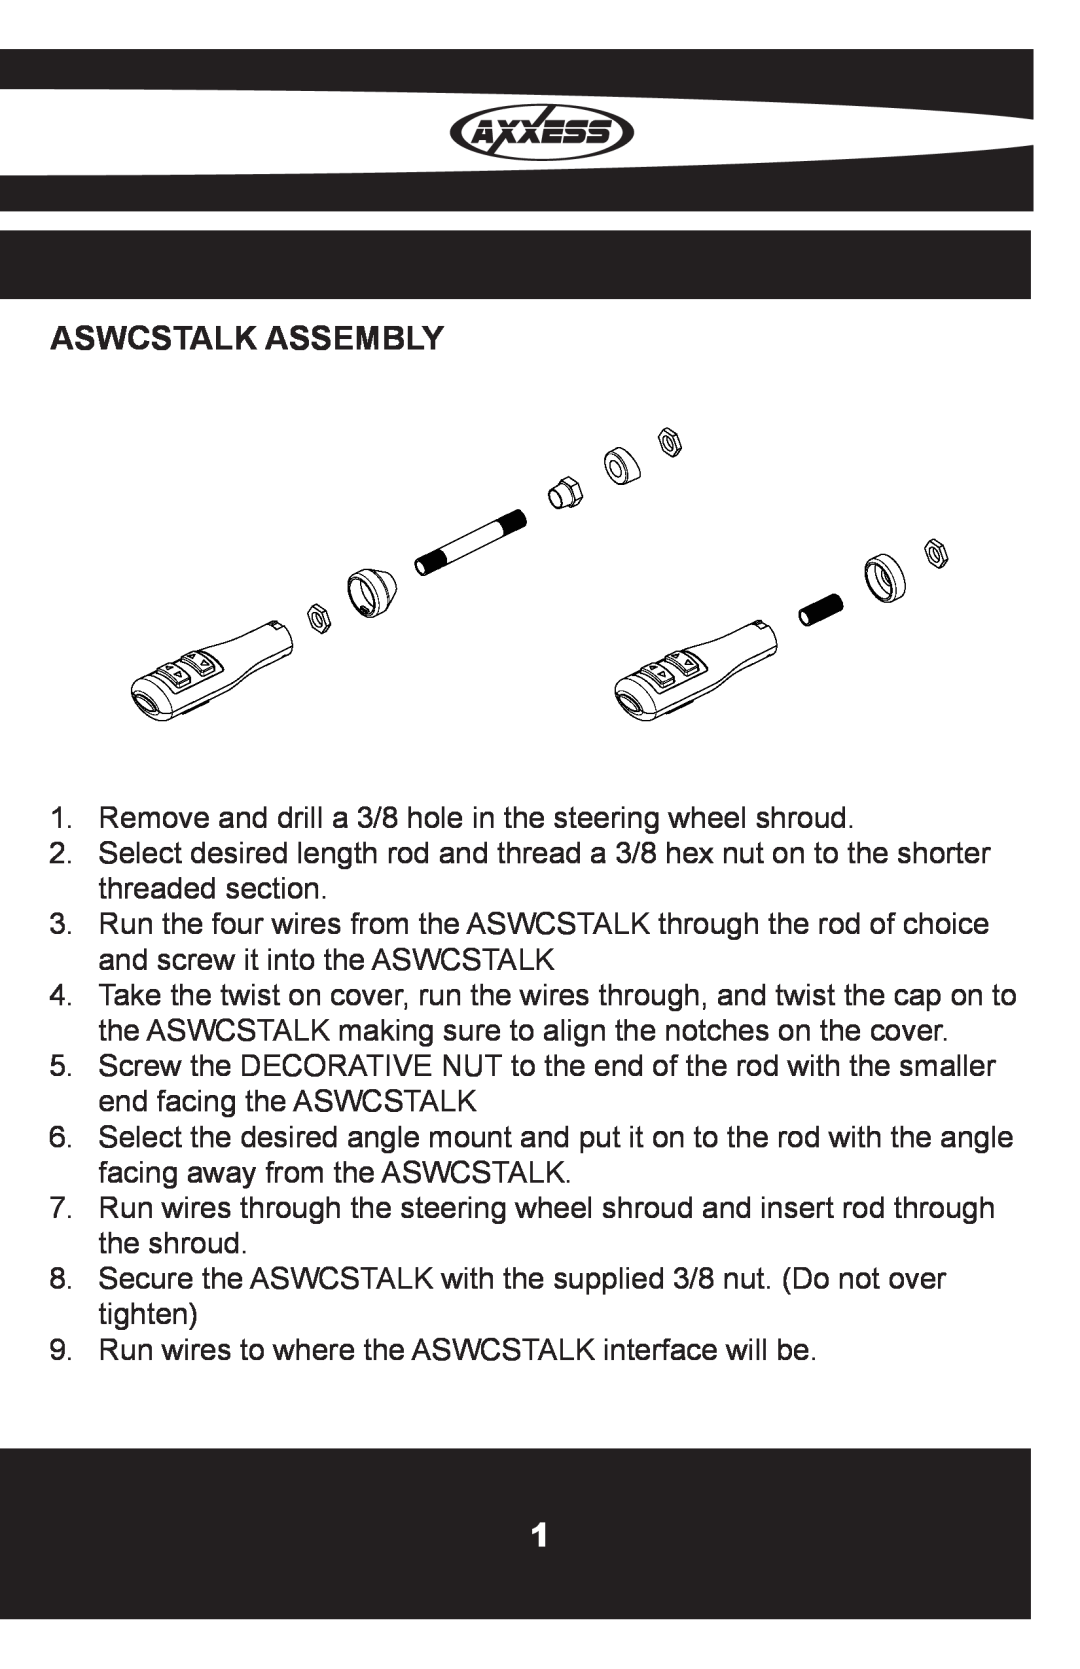 Metra Electronics OESWC-6502-STK installation instructions Aswcstalk Assembly 